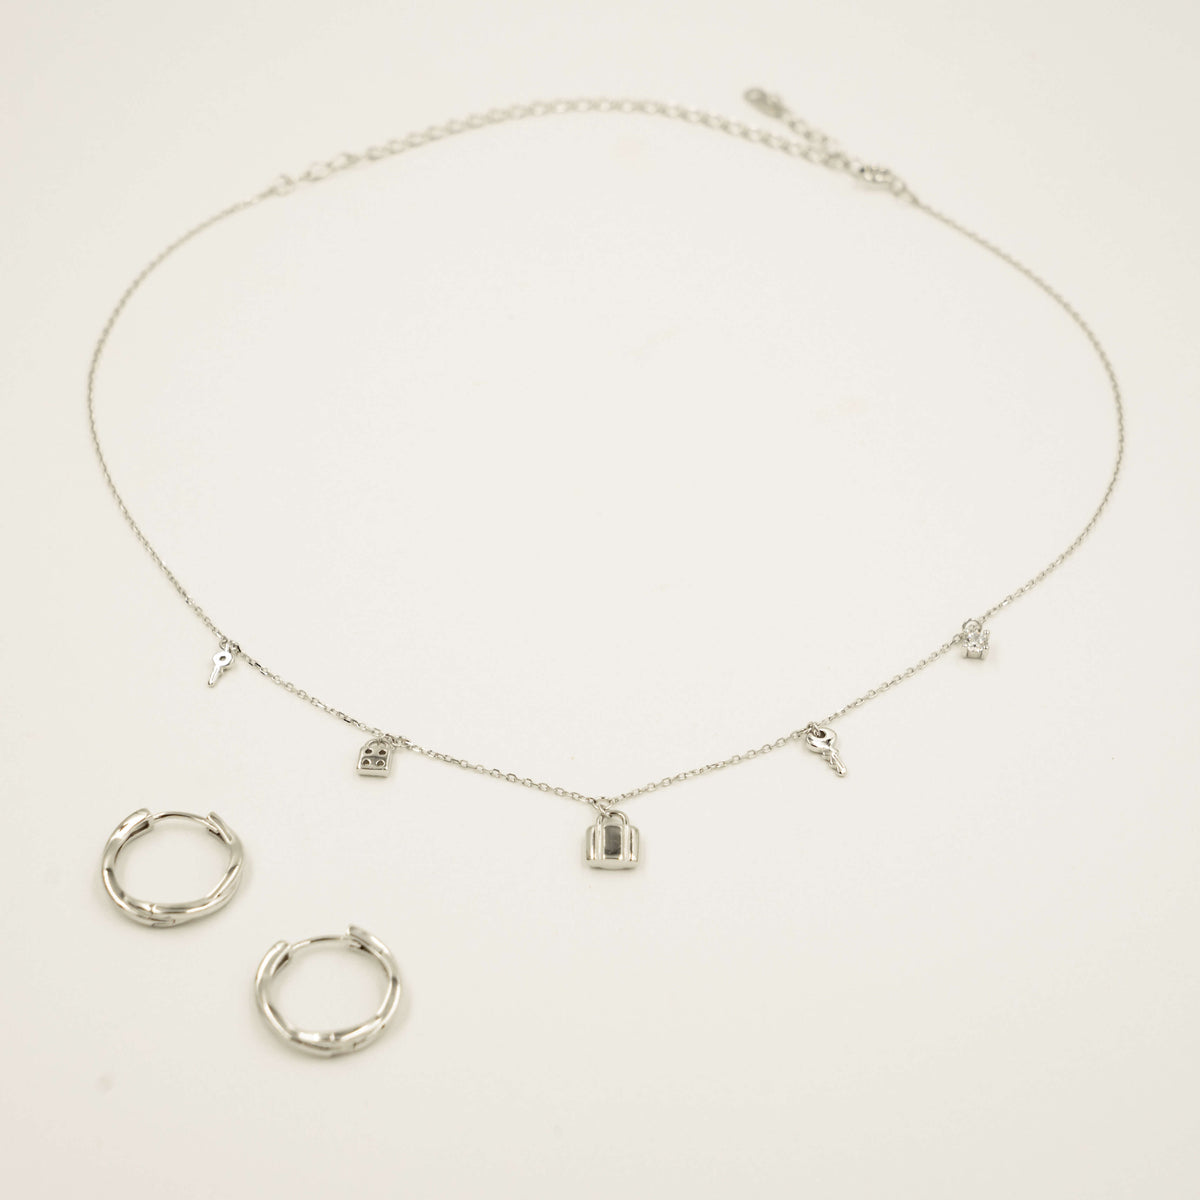 Earrings and a necklace together. The earrings are hoop earrings. The charm necklace has five silver charms on a silver chain. The charms include two a diamonds, two keys and a suitcase.